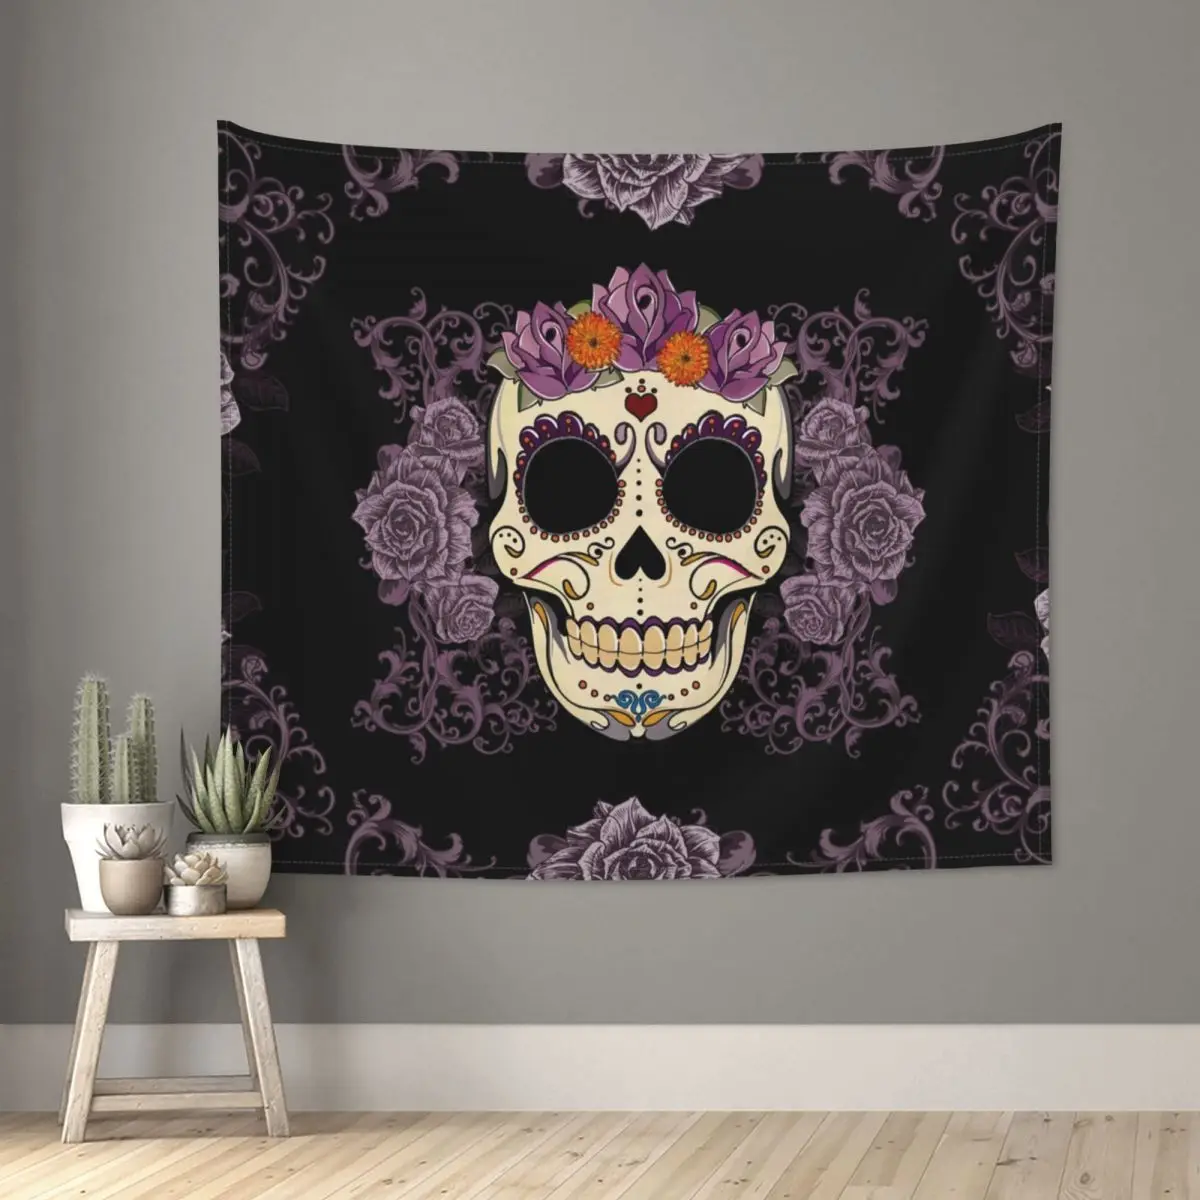 Vintage Skull And Roses Tapestry Hippie Polyester Wall Hanging Home Decor Beach Mat Art Wall Tapestry valentine s day gift roses heart candles printed wall tapestry